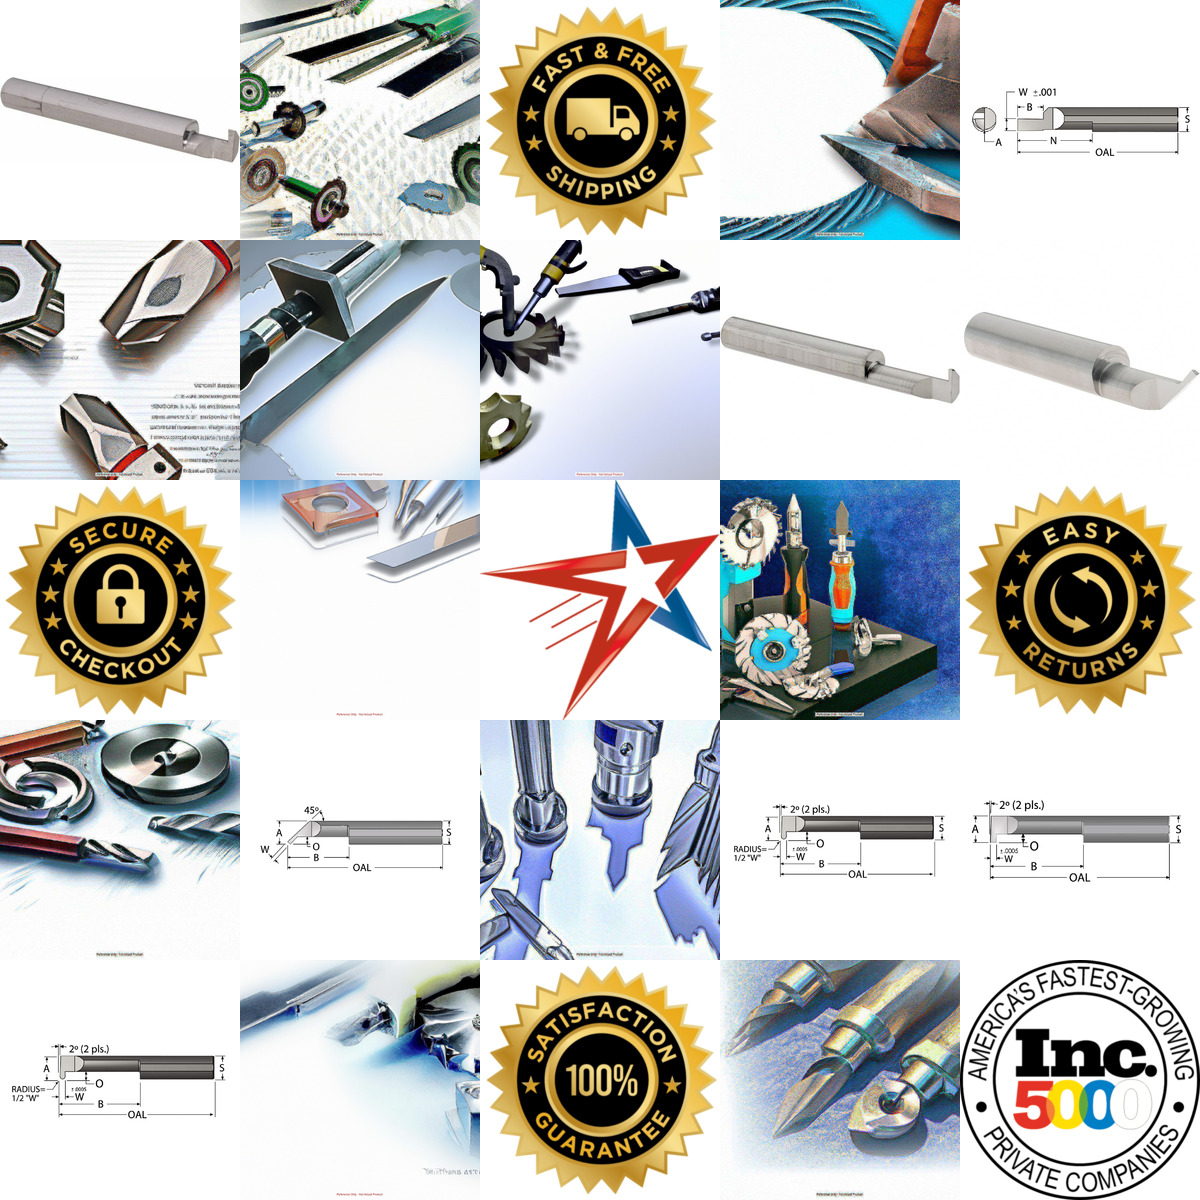 A selection of Scientific Cutting Tools products on GoVets